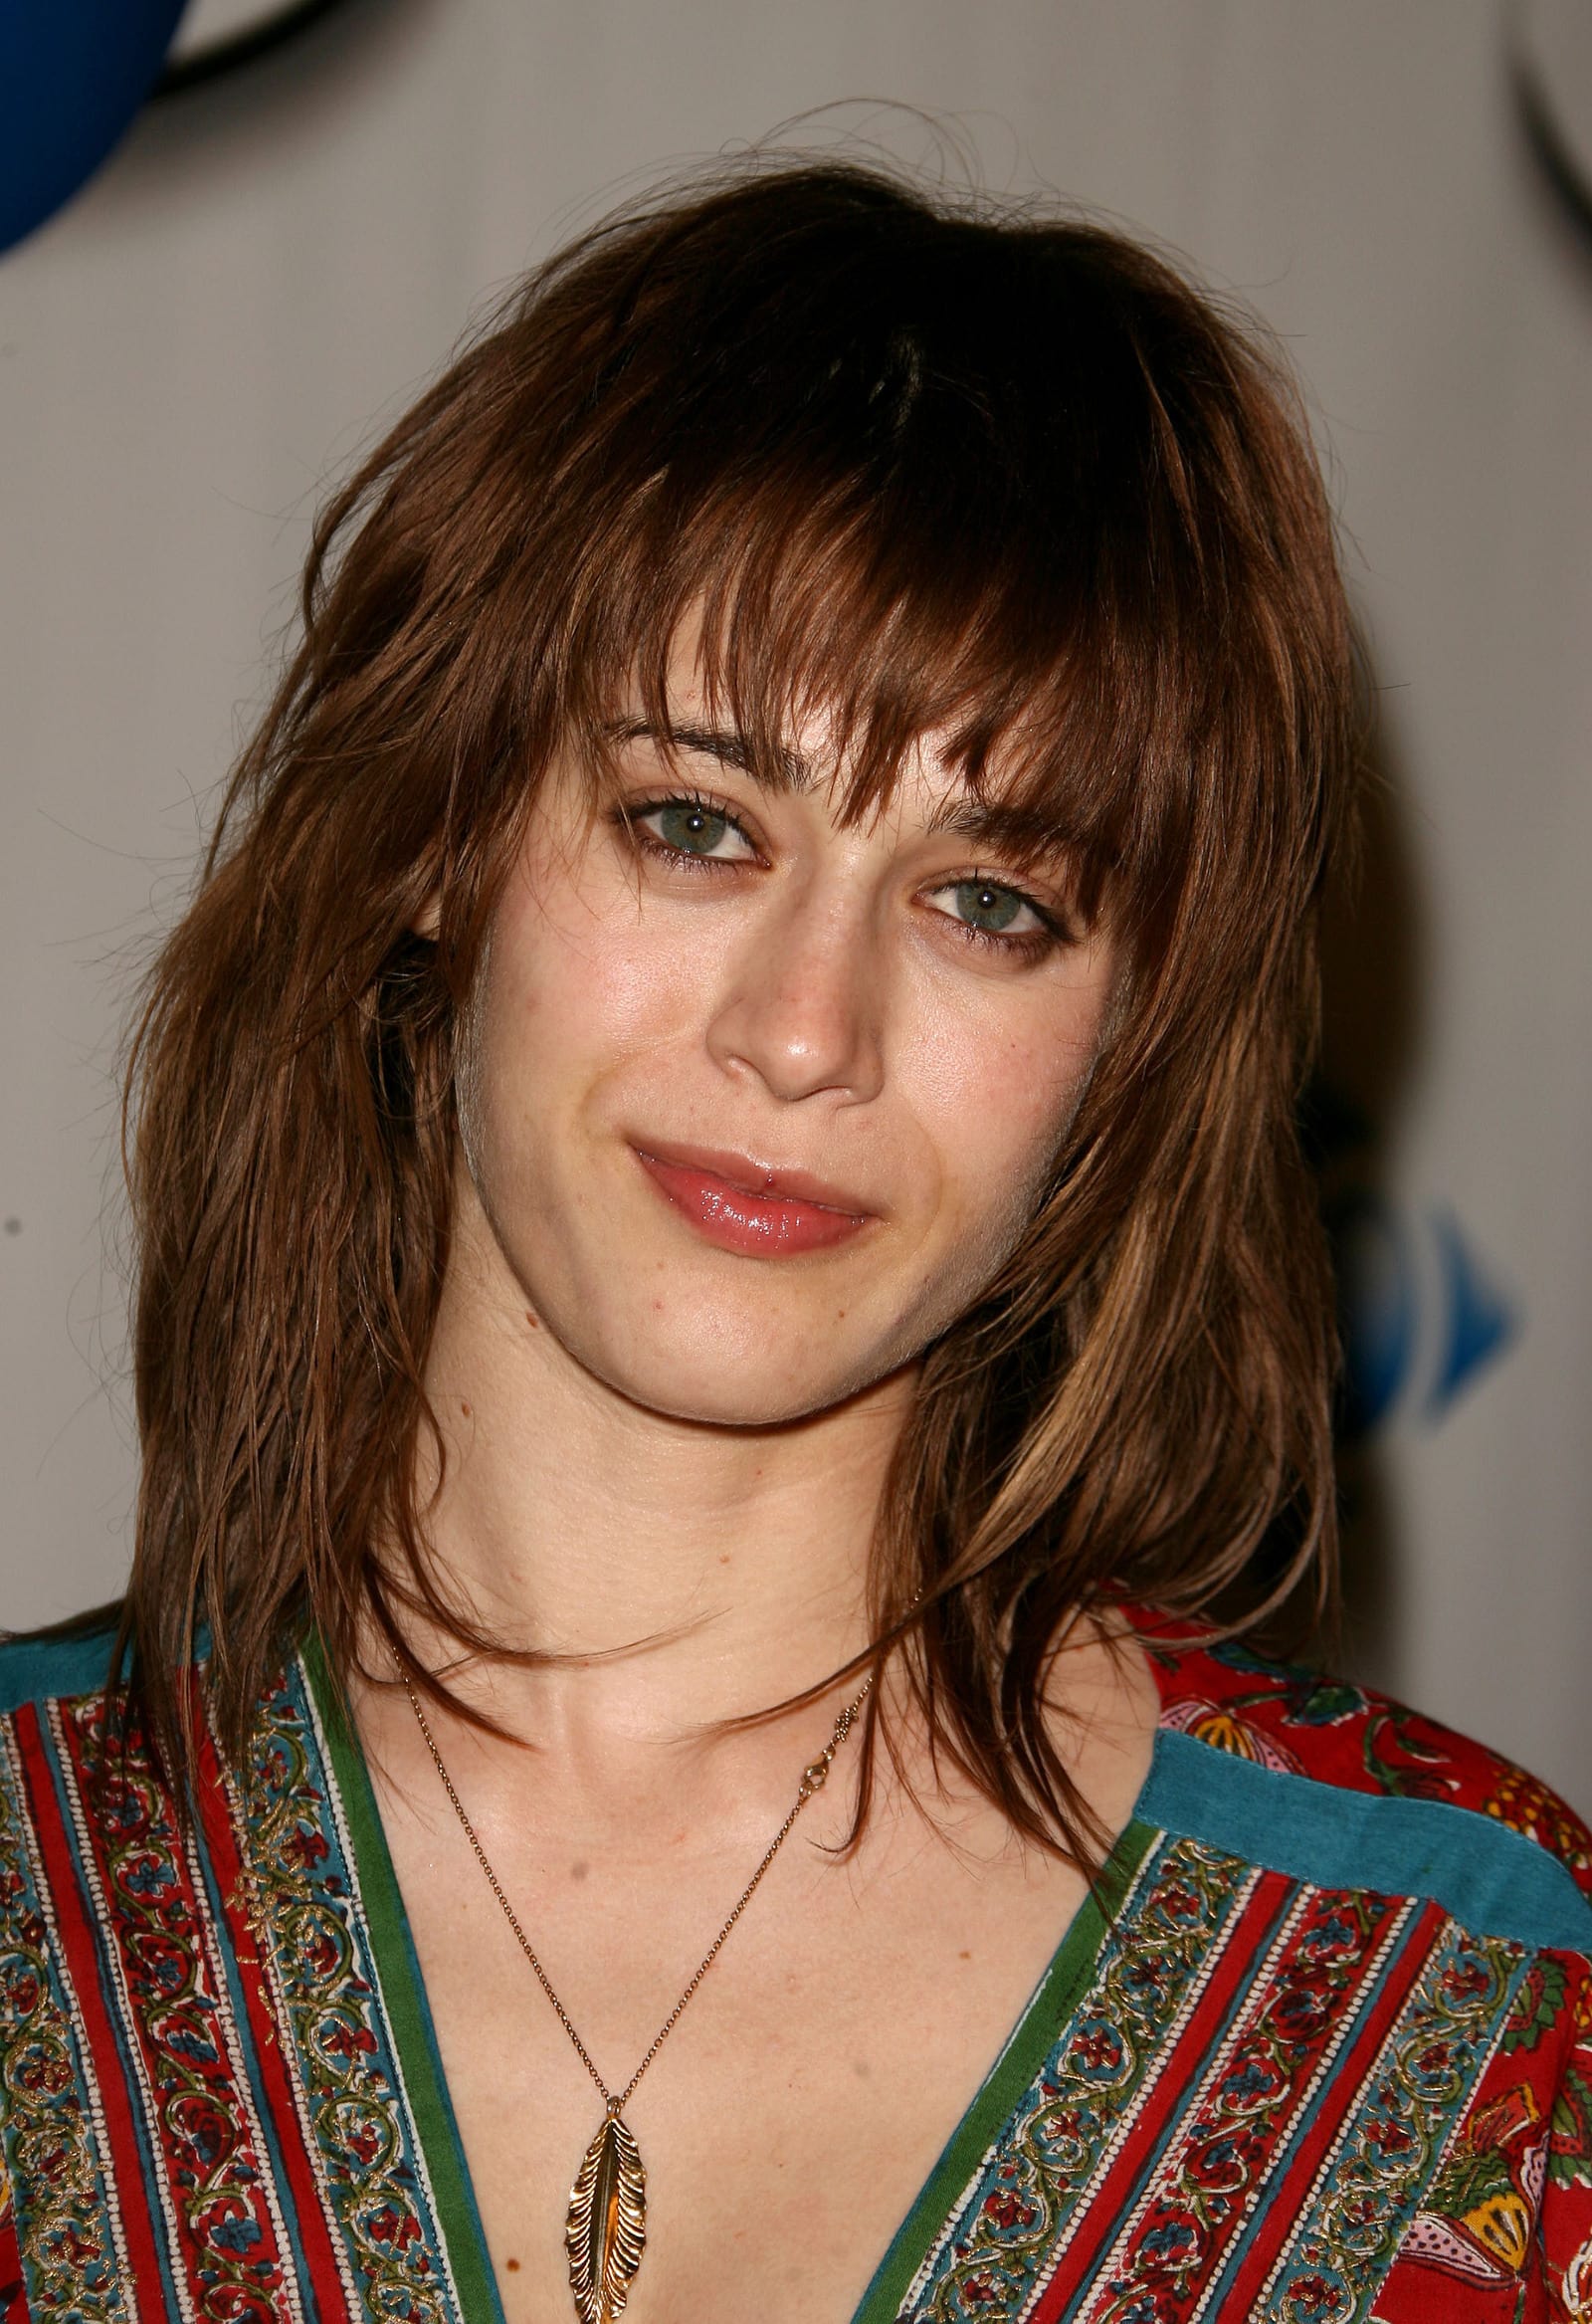 Mean Girls Actress Lizzy Caplan - Movie Fanatic